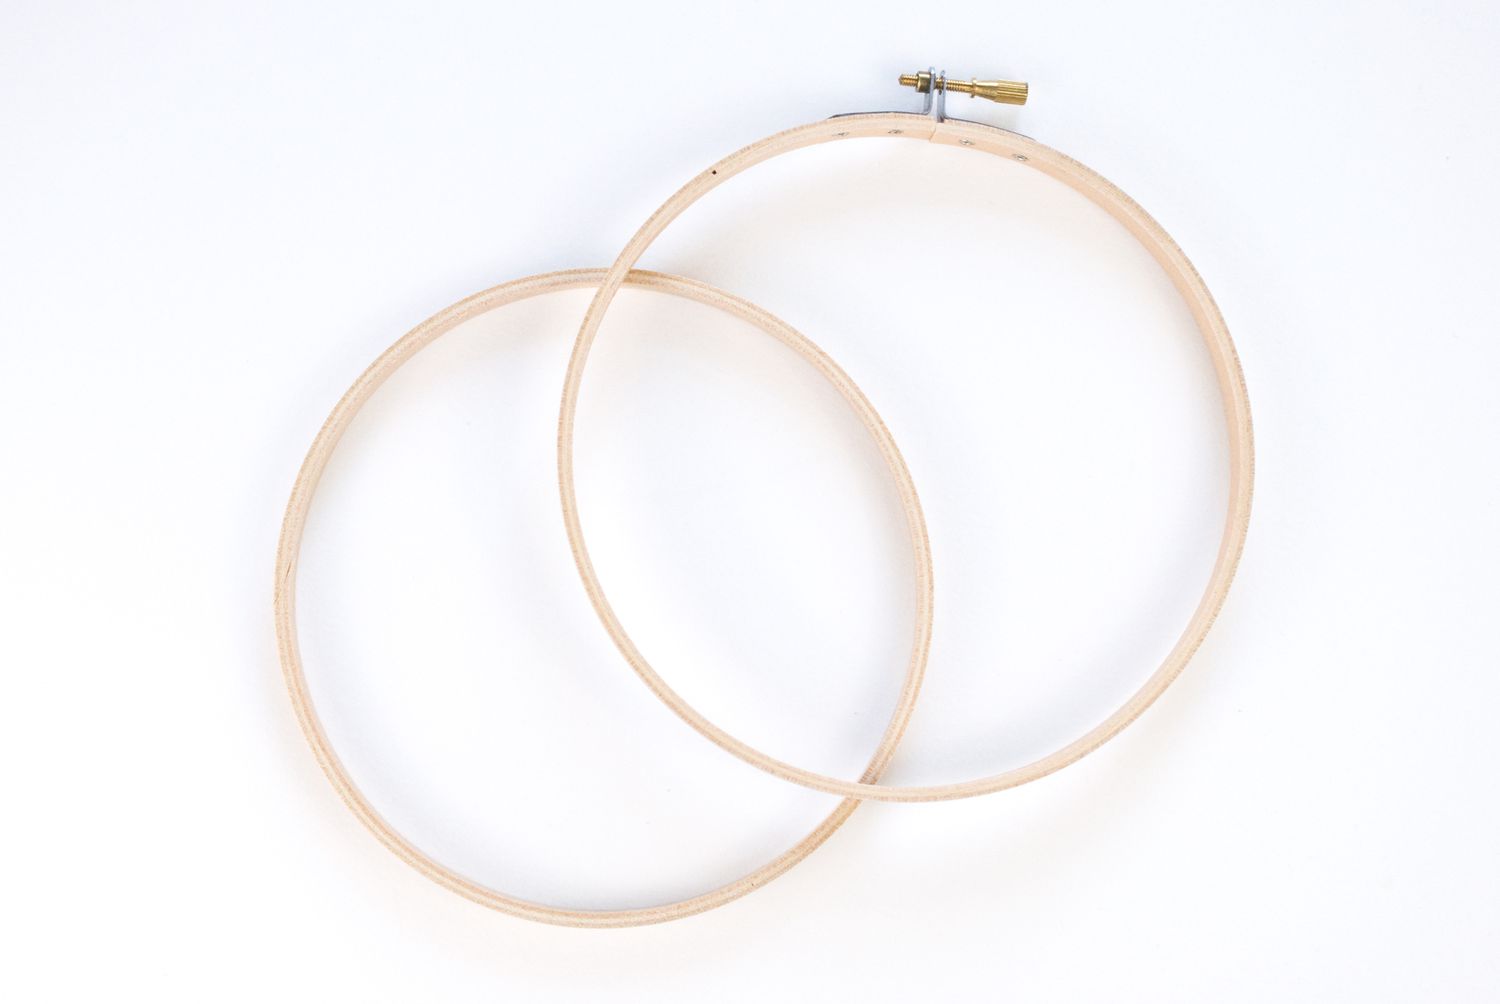 An embroidery hoop taken apart so there are two circles.